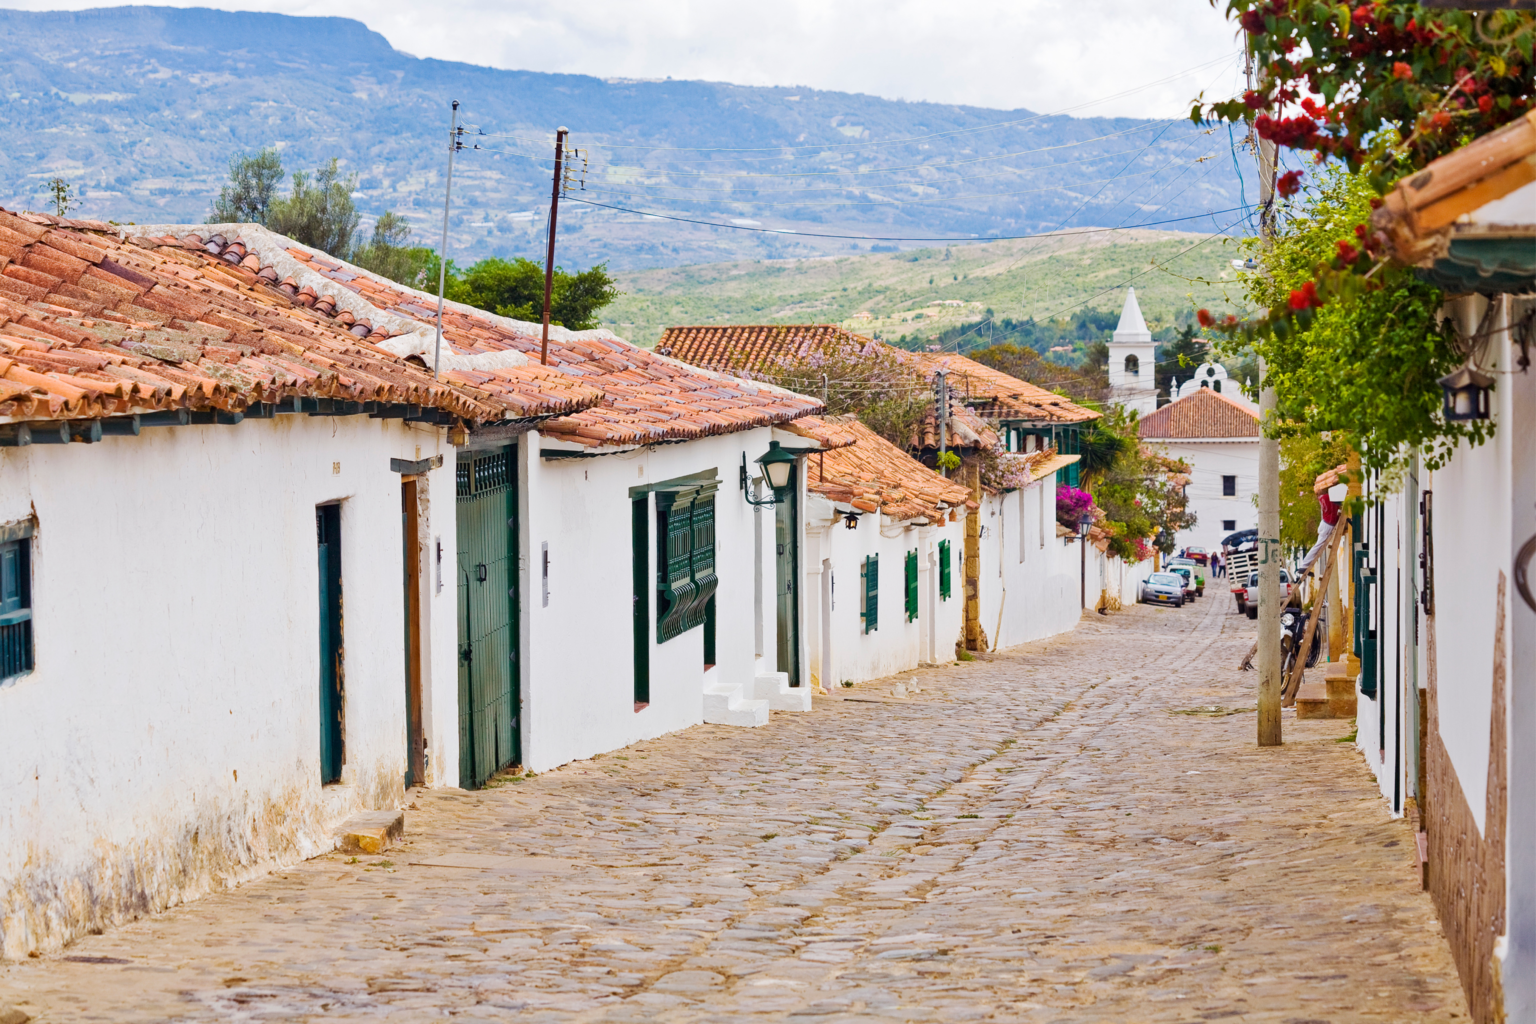 Cobblestone street with white homes